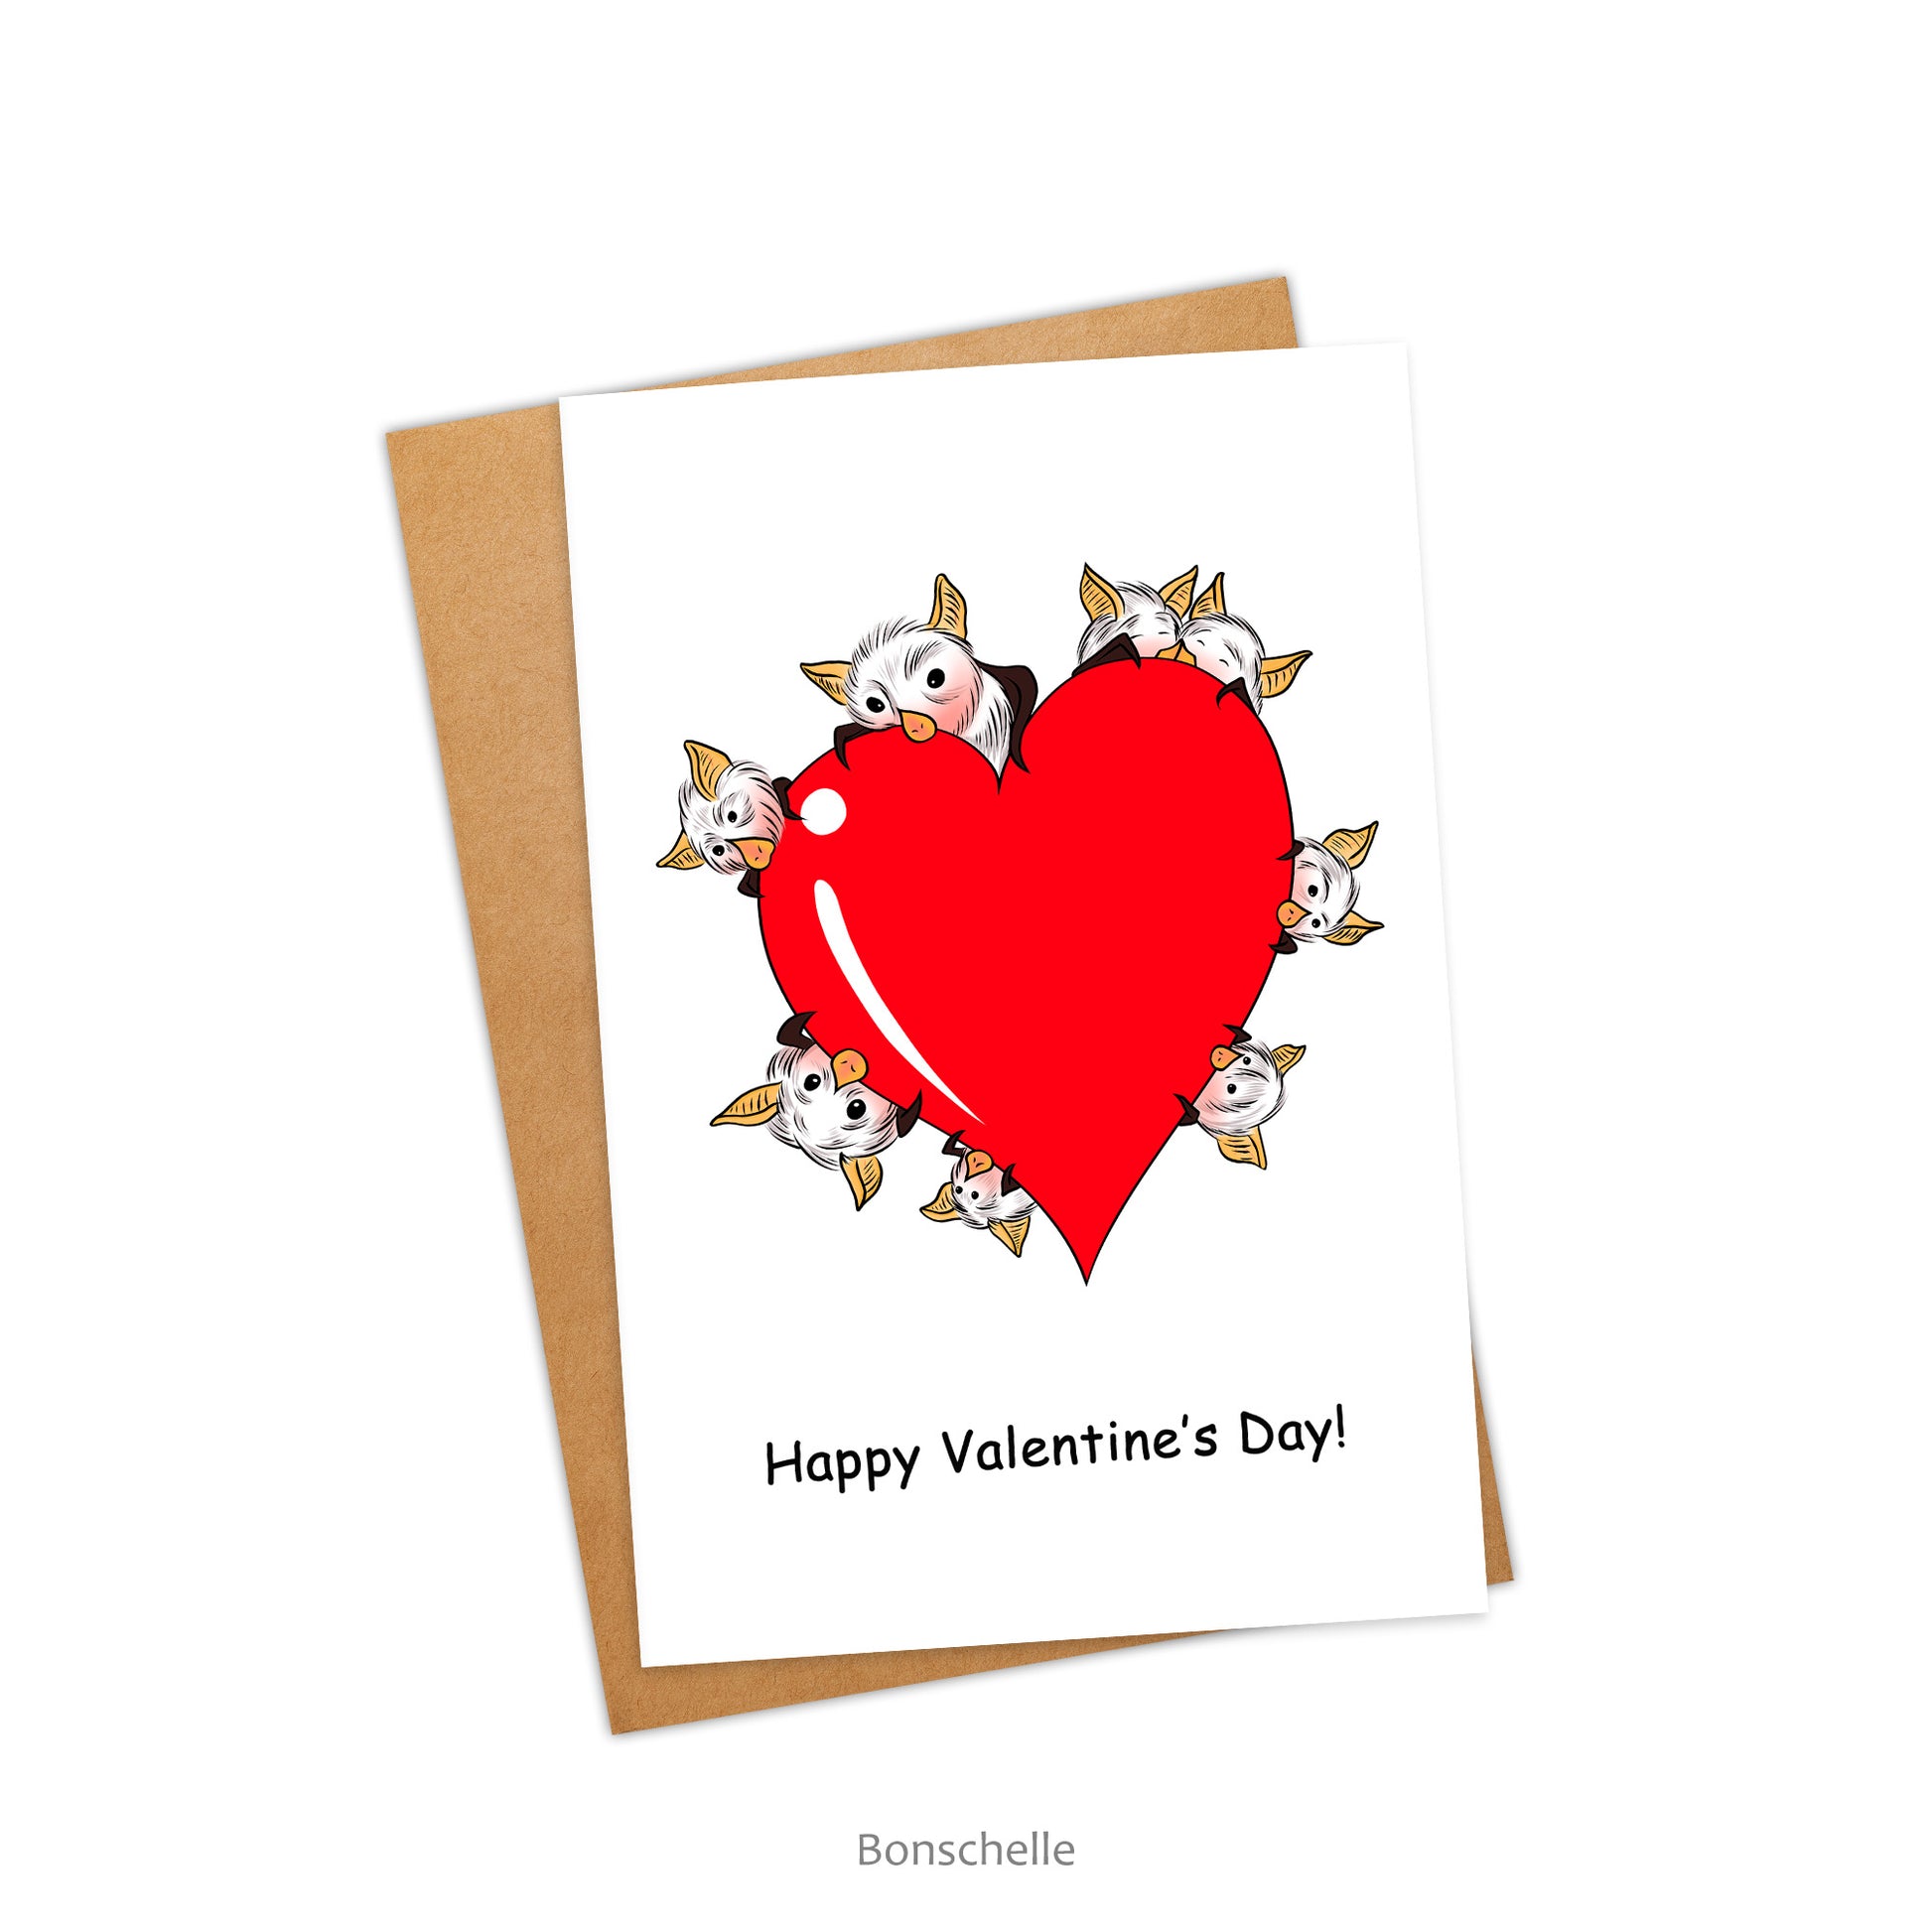 Chibi Bat with Love Heart Card  with the greeting 'Happy Valentine's Day' on the front